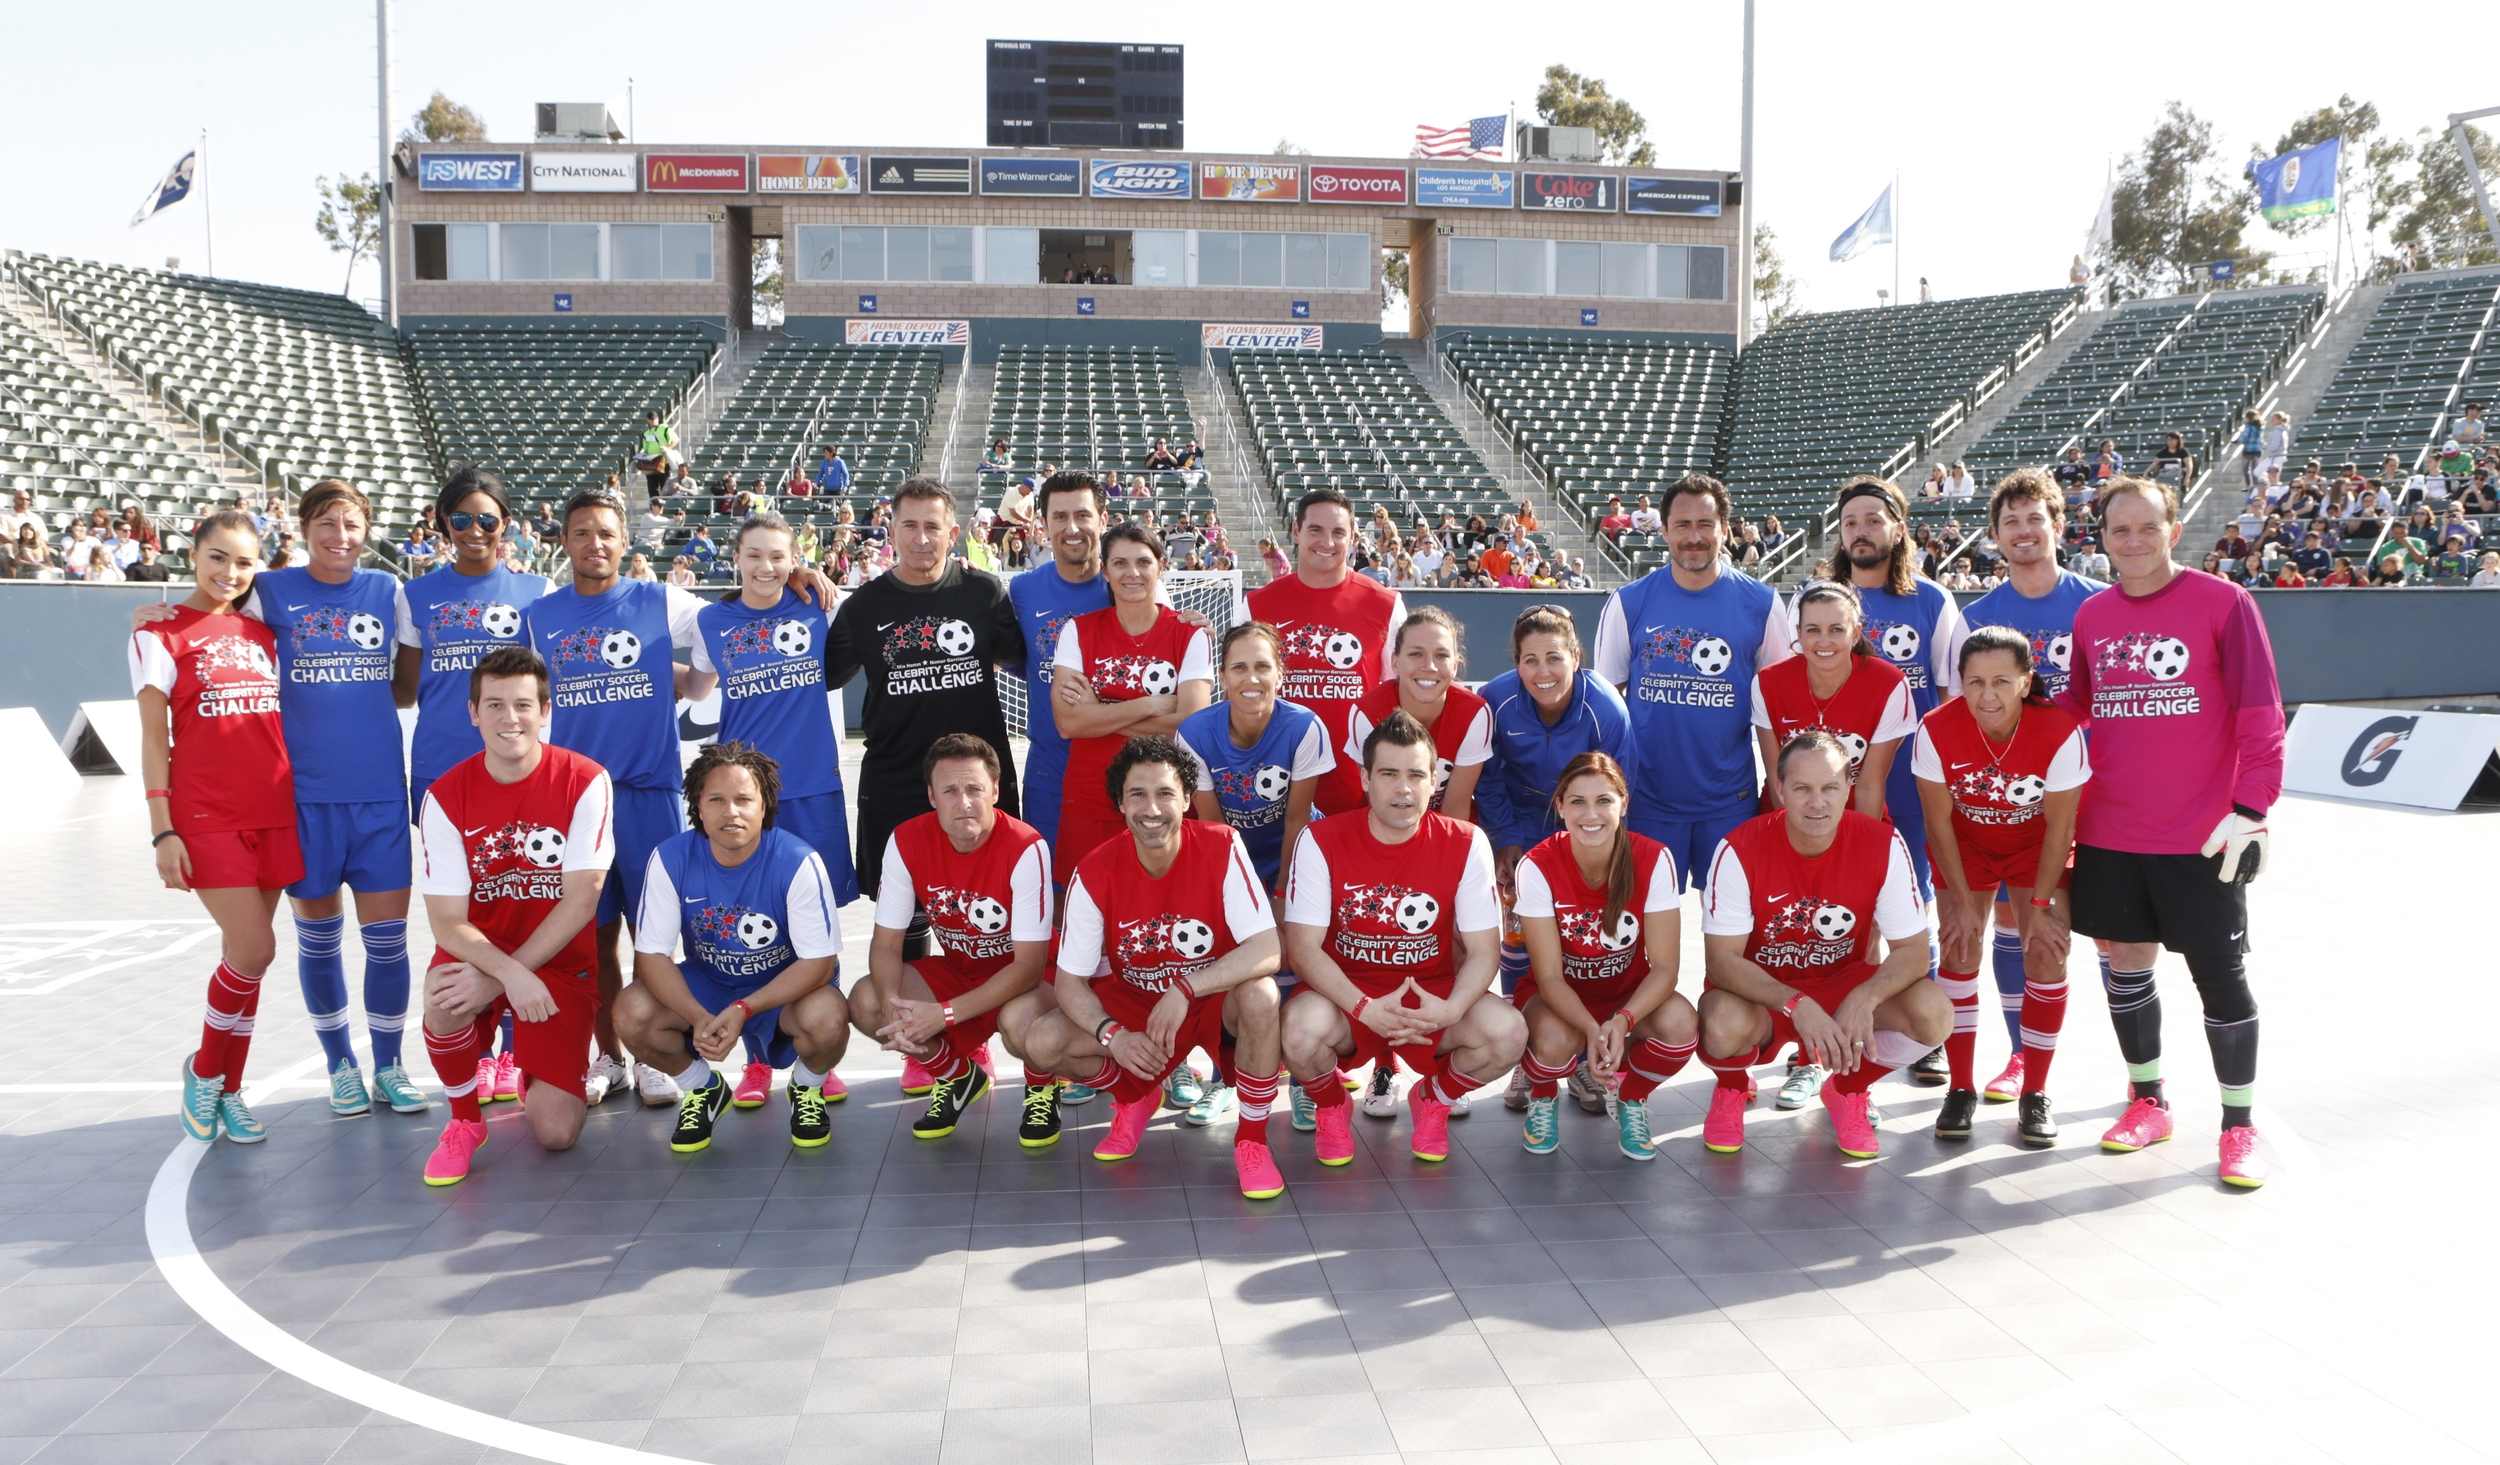 23 3rd Annual Mia Hamm Nomar Garciaparra Celebrity Soccer Challenge Photos  & High Res Pictures - Getty Images